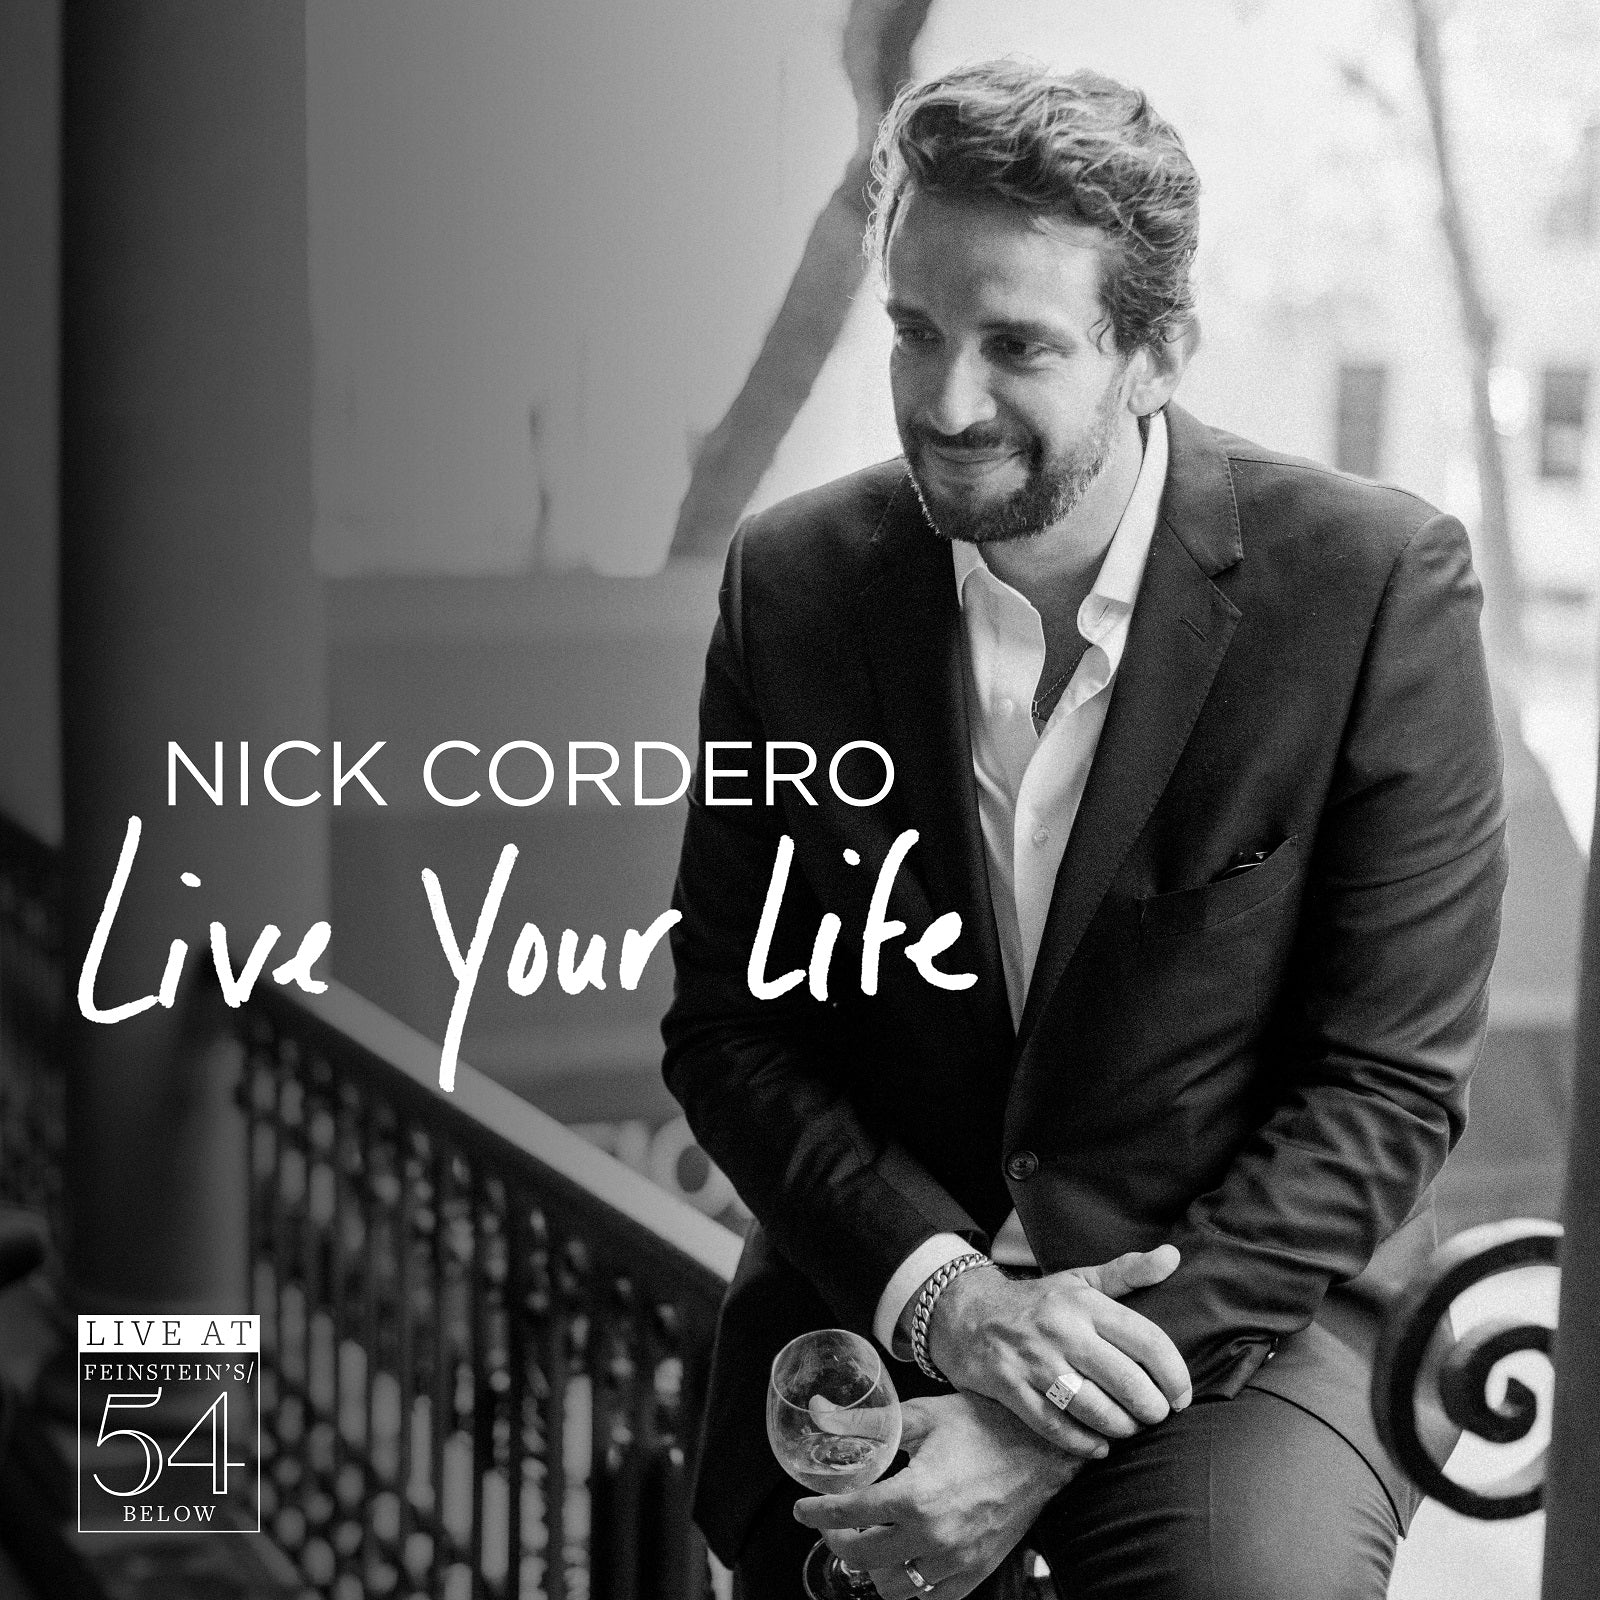 Nick Cordero: Live Your Life - Live at Feinstein's/54 Below [MP3]